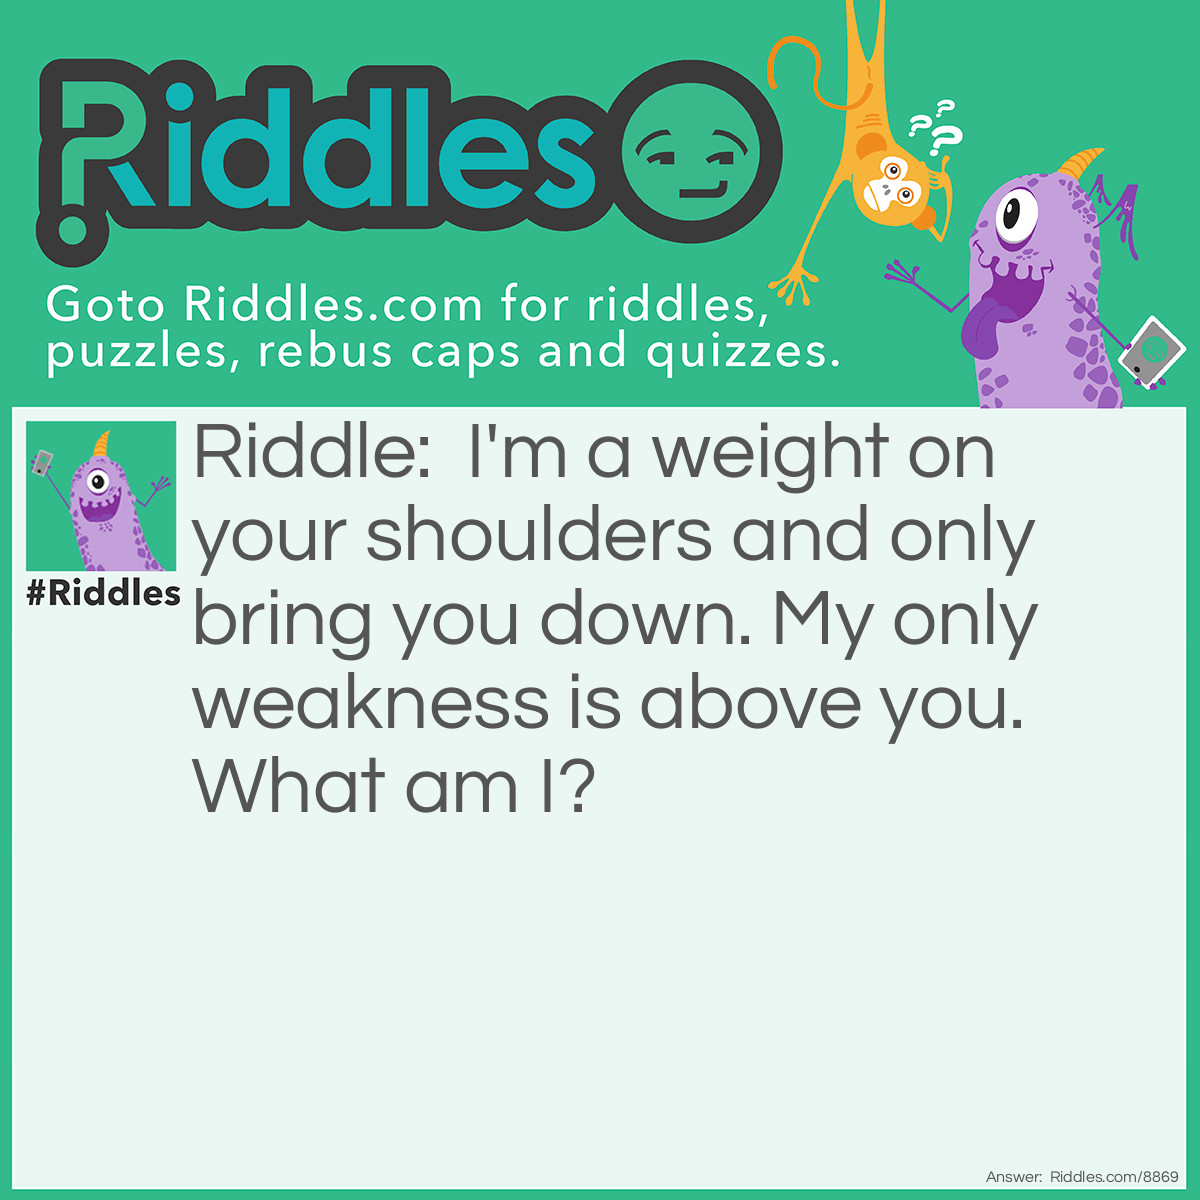 Riddle: I'm a weight on your shoulders and only bring you down. My only weakness is above you. What am I? Answer: Gravity.